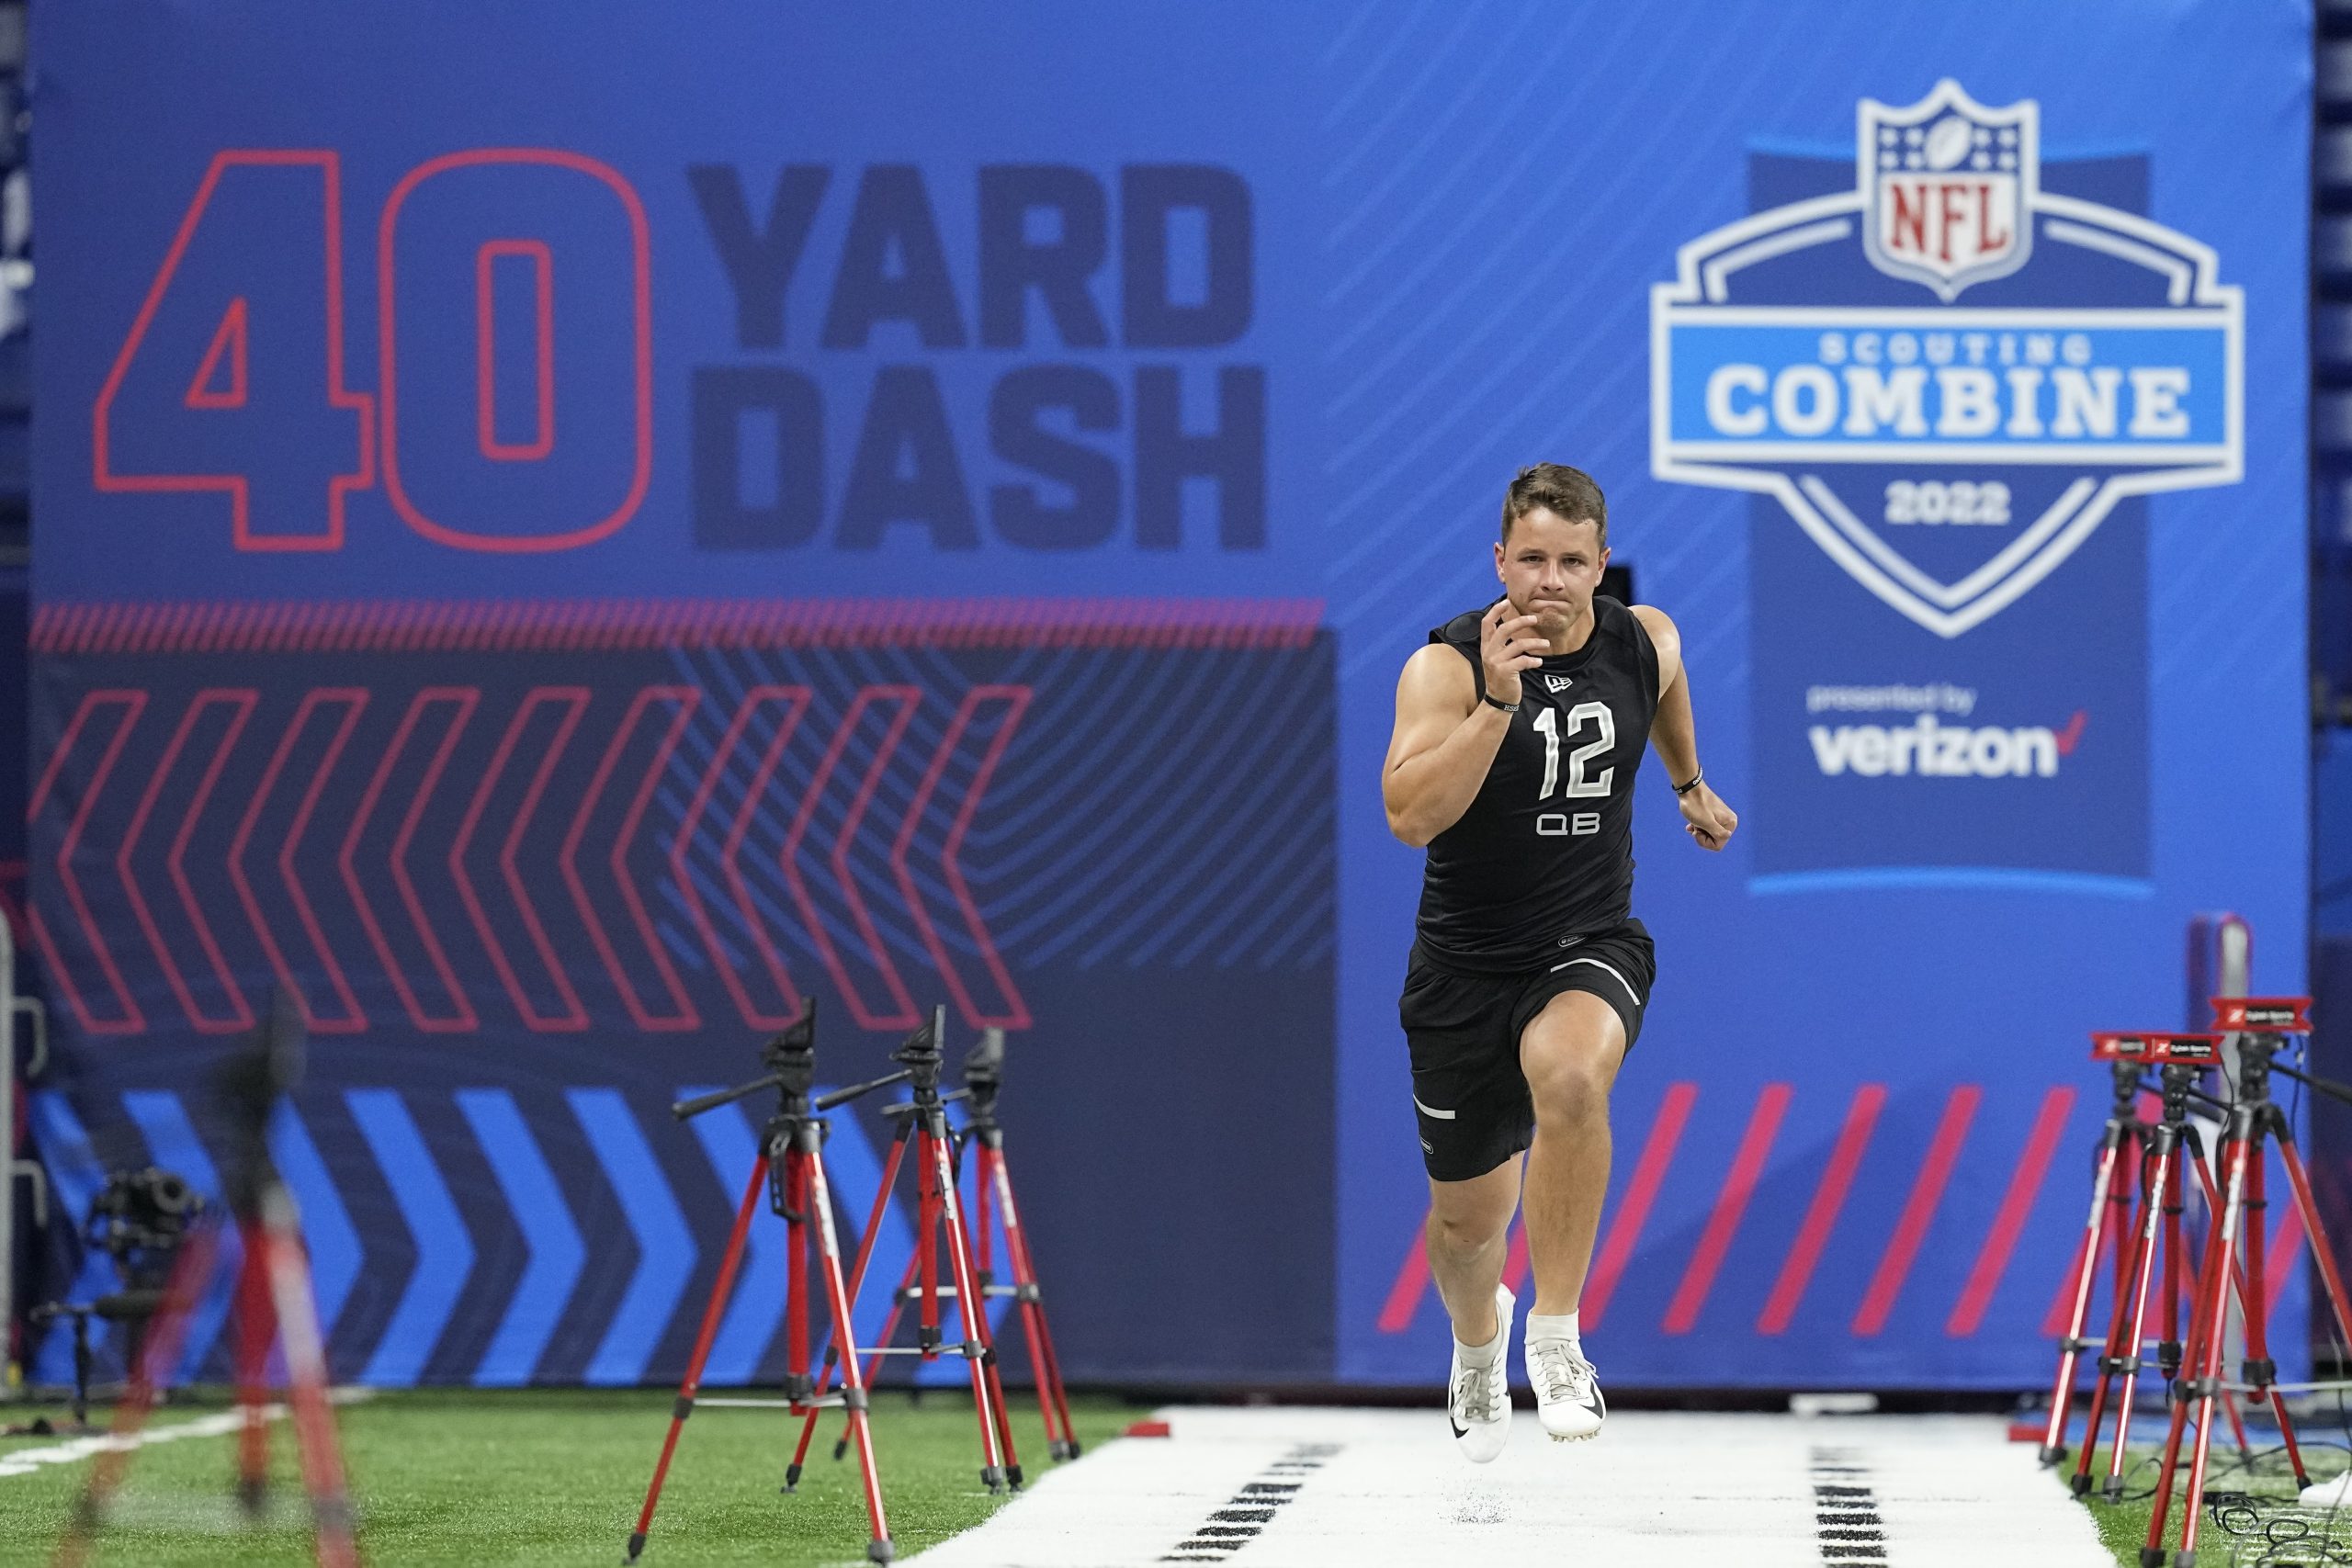 Three Dot Thoughts – Purdy's NFL Combine Stumper, Bagley and ASU? Chris  Paul's Future